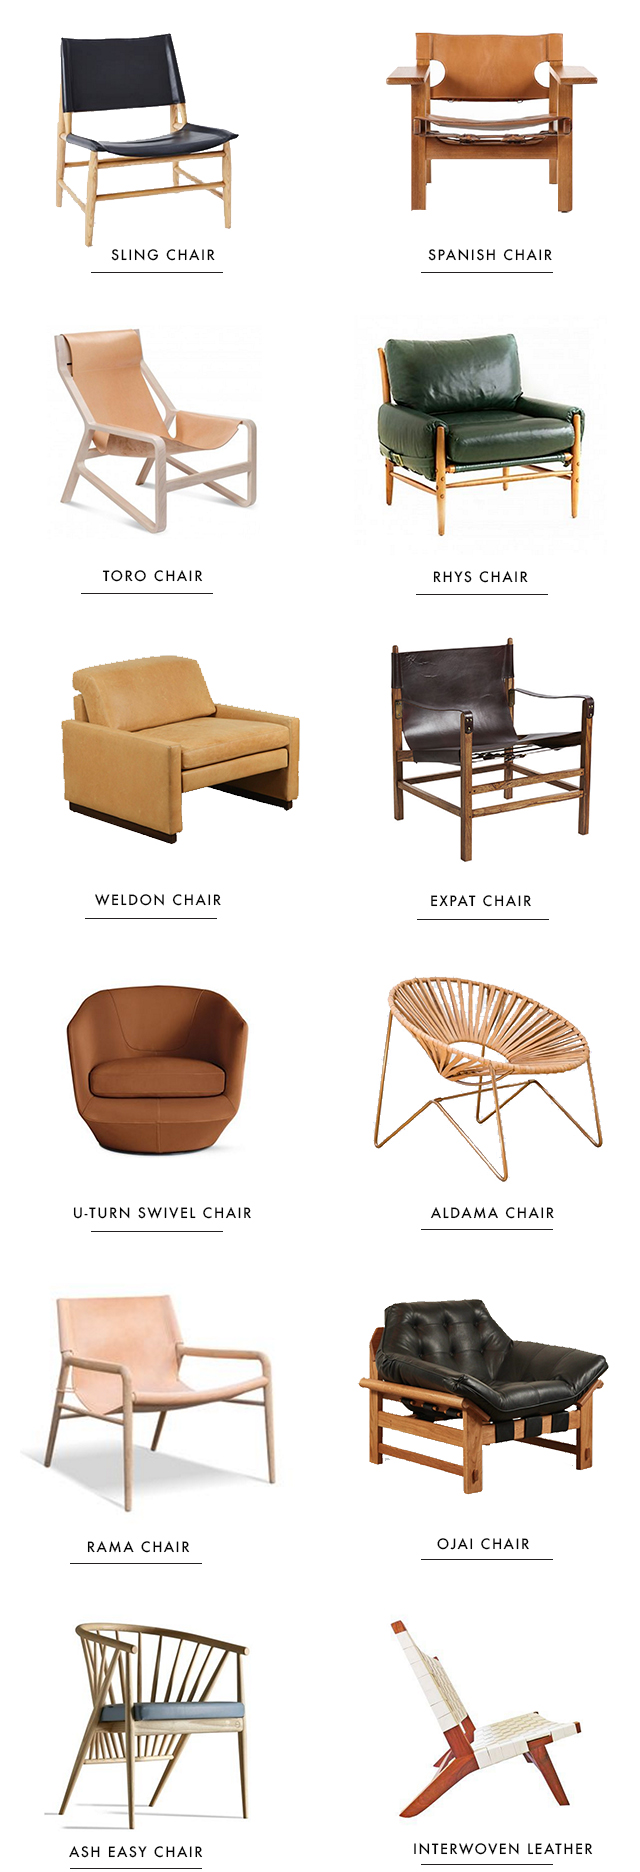 round up // leather accent chairs // sarah sherman samuel